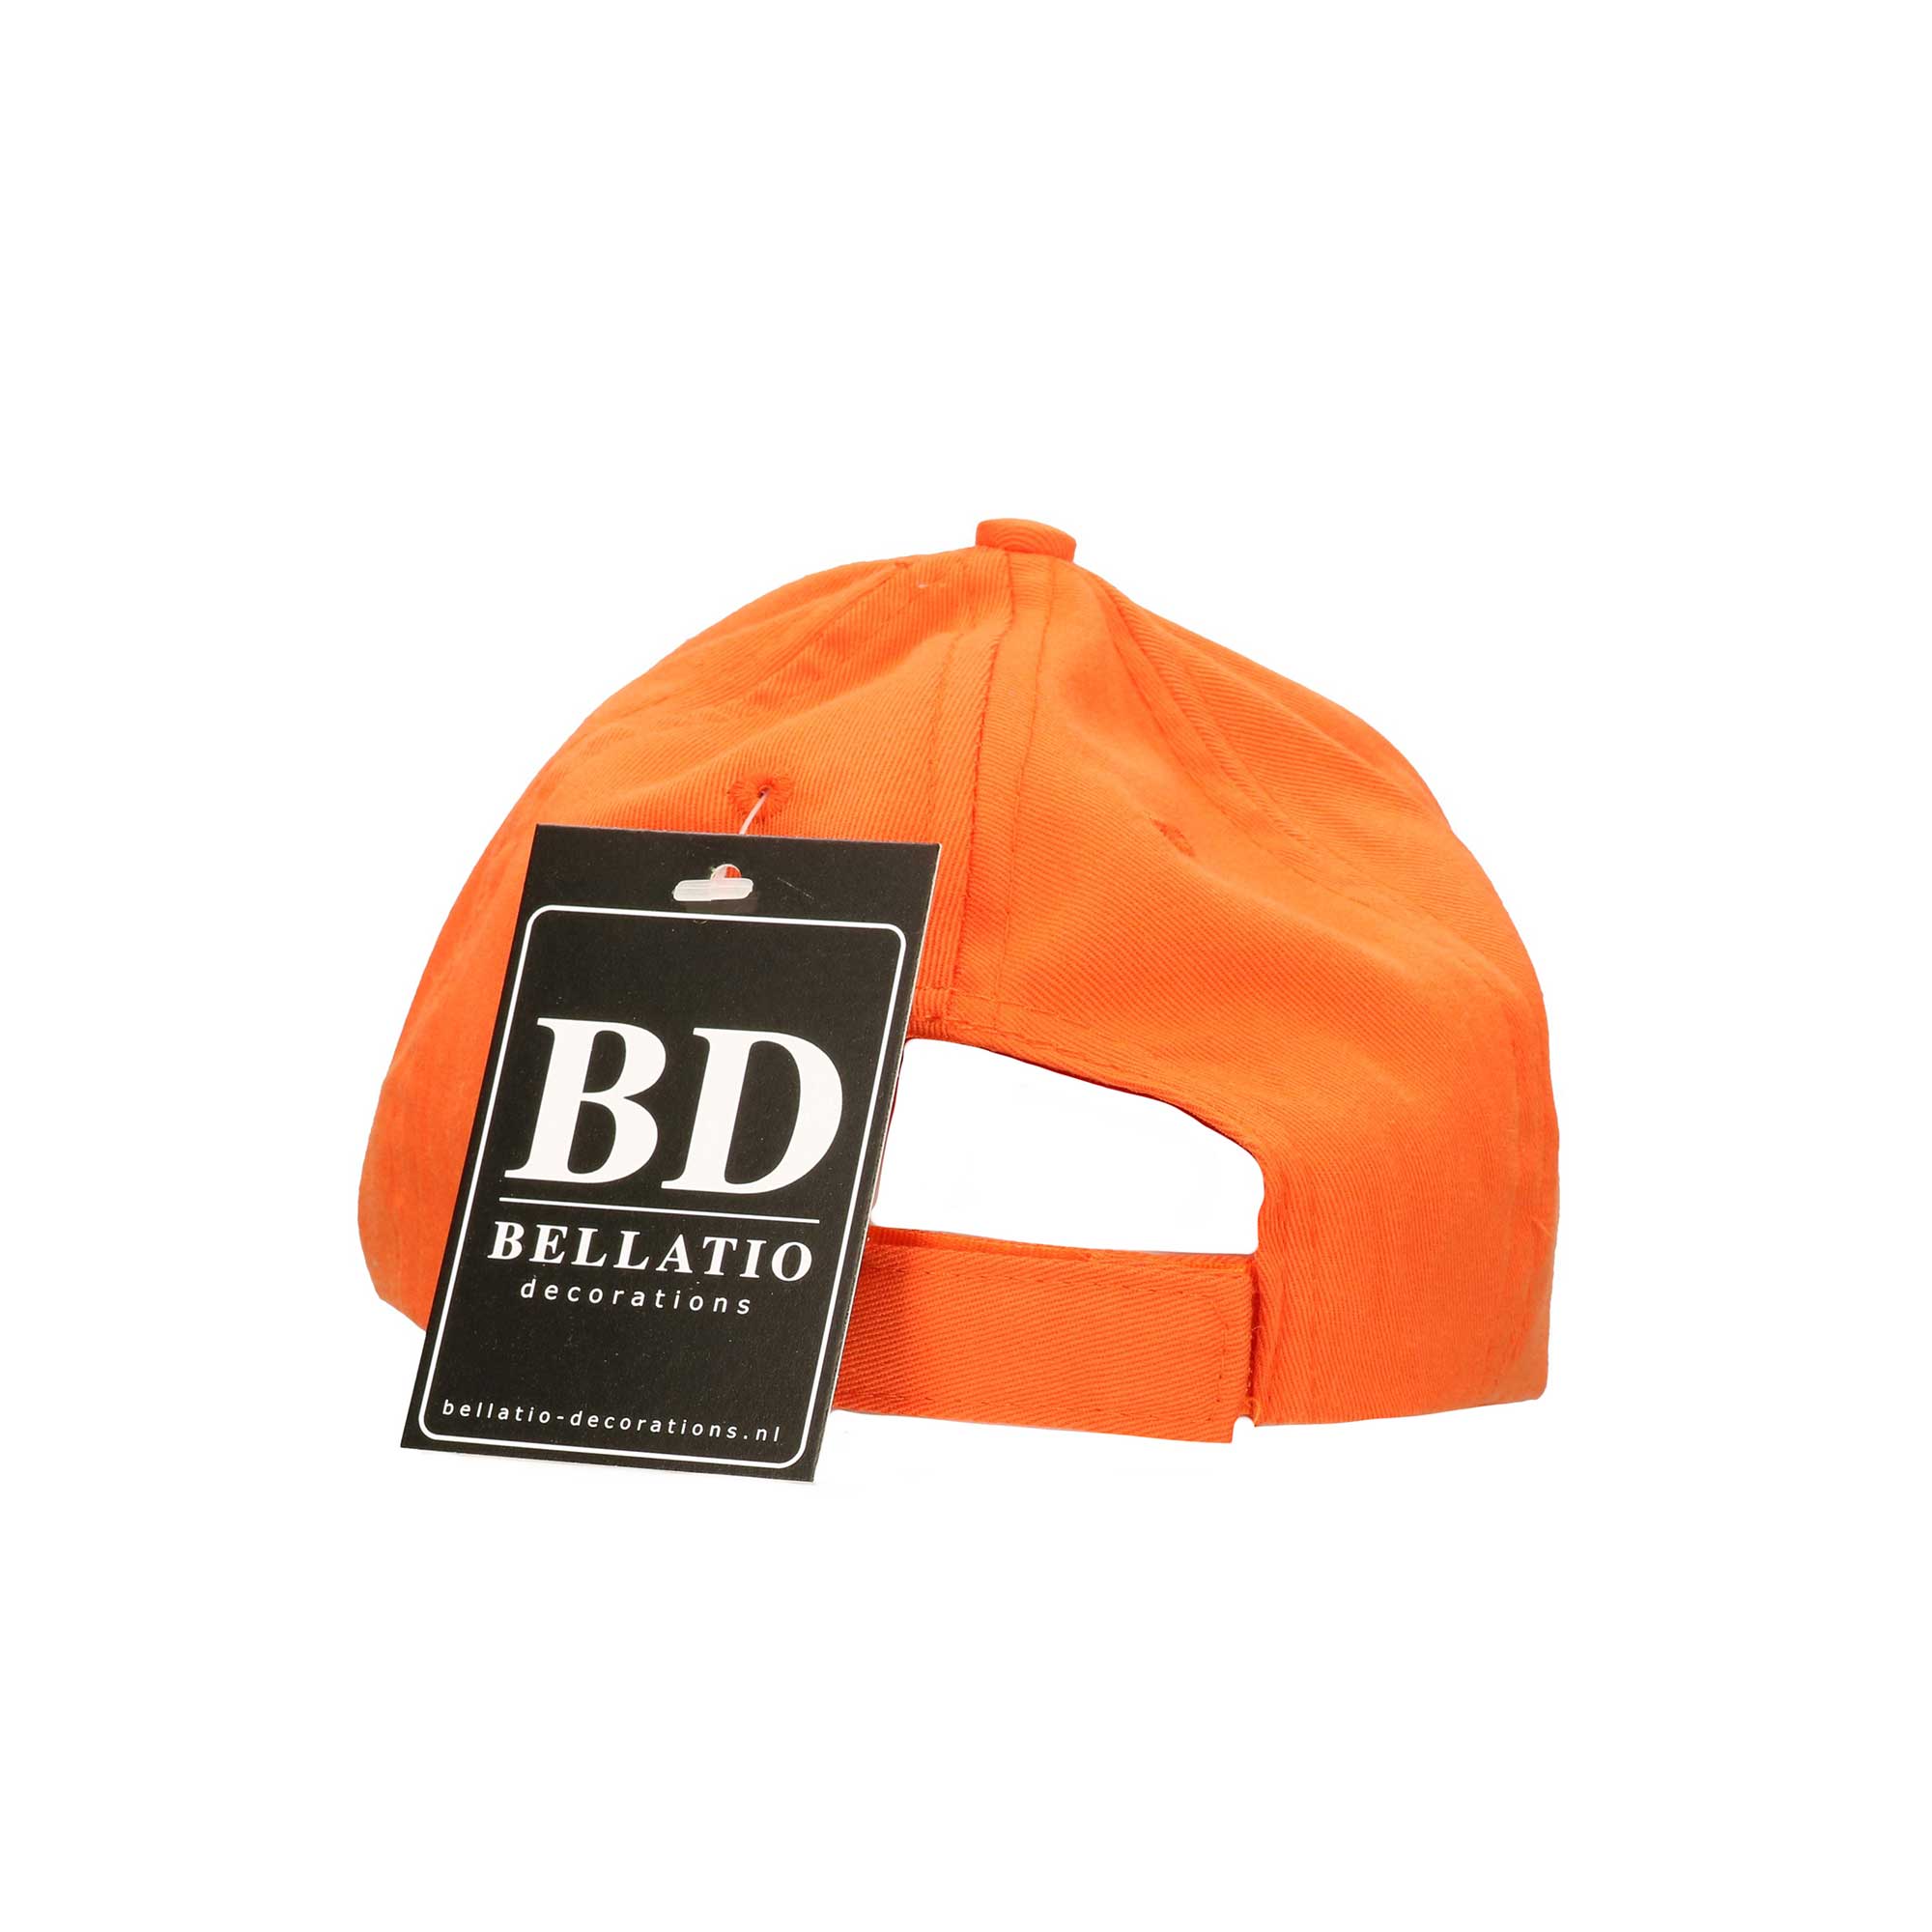 Queen cap orange with white letters for women